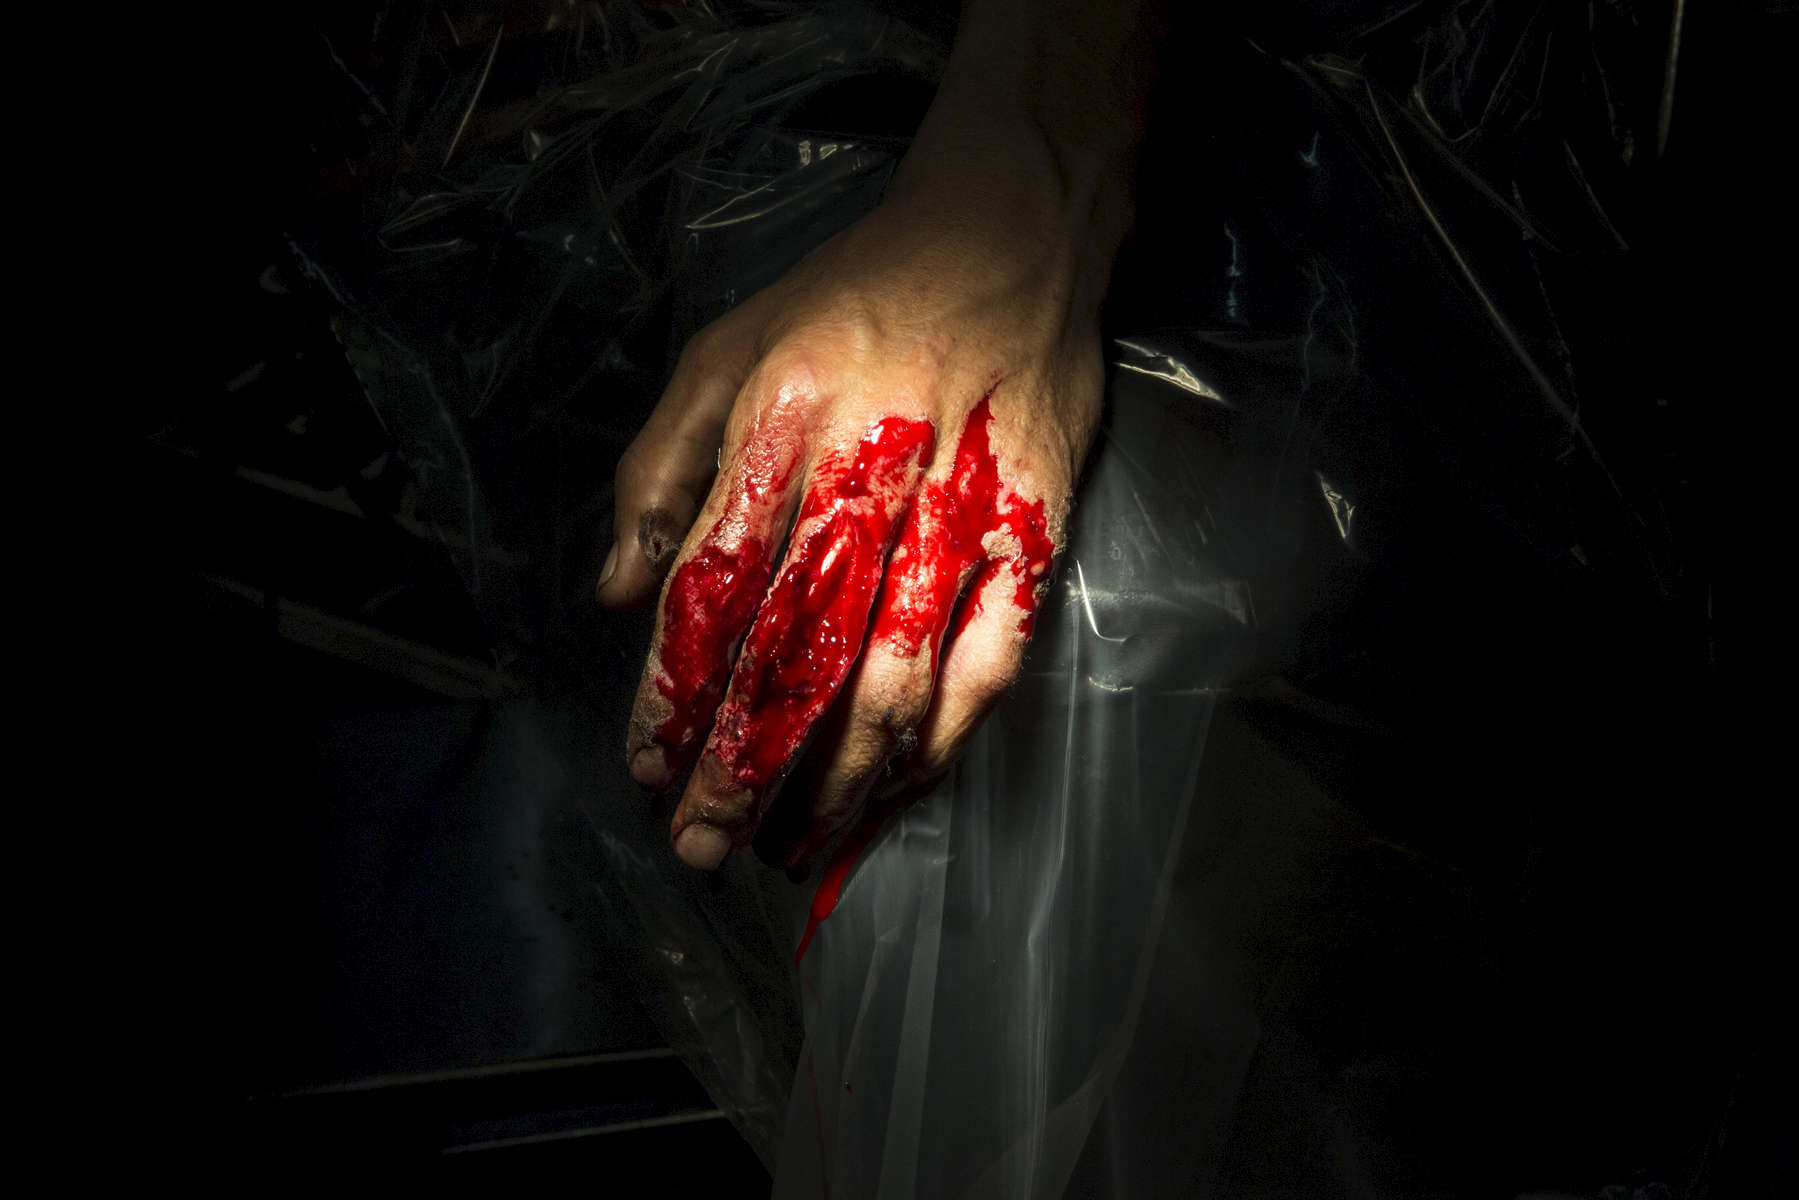 LASHKAR GAH, AFGHANISTAN -MARCH 26, 2015: A bloody hand is seen in the operation room at the Emergency hospital.  As of April, 2016 the Emergency hospital stated that in the first quarter their patient numbers were up more than 30% from last year.  Afghan civilians are at greater risk today than at any time since Taliban rule. According to UN statistics, in the first half of 2016 at least 1,600 people had died, and more than 3,500 people were injured, a 4 per cent increase in overall civilian causalities compared to the same period last year. The upsurge in violence has had devastating consequences for civilians, with suicide bombings and targeted attacks by the Taliban and other insurgents causing 70 percent of all civilian casualties.  